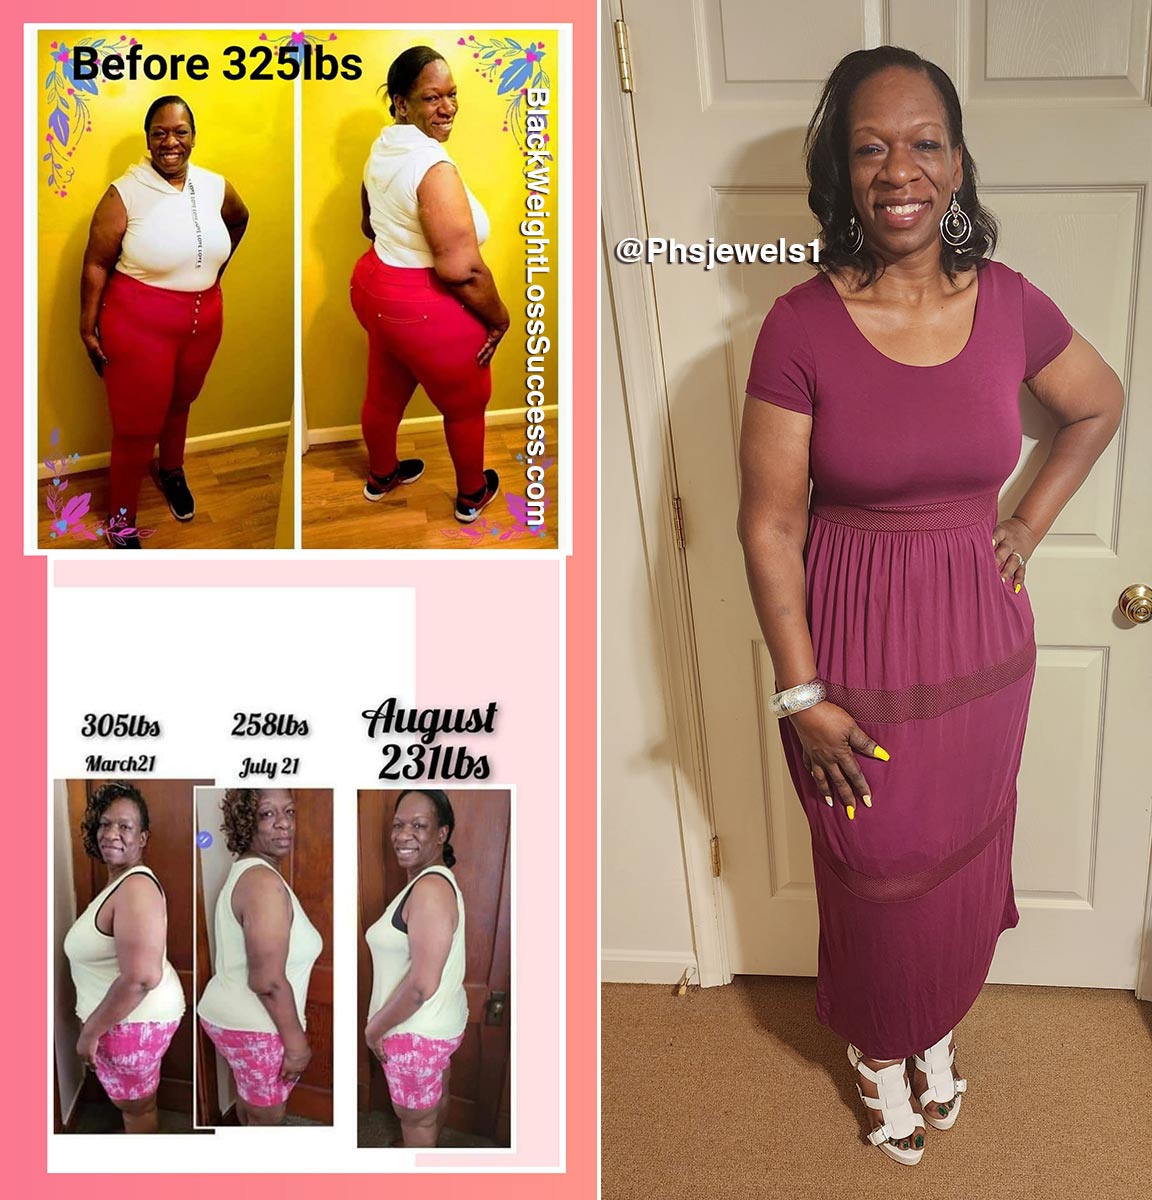 Treva before and after weight loss surgery